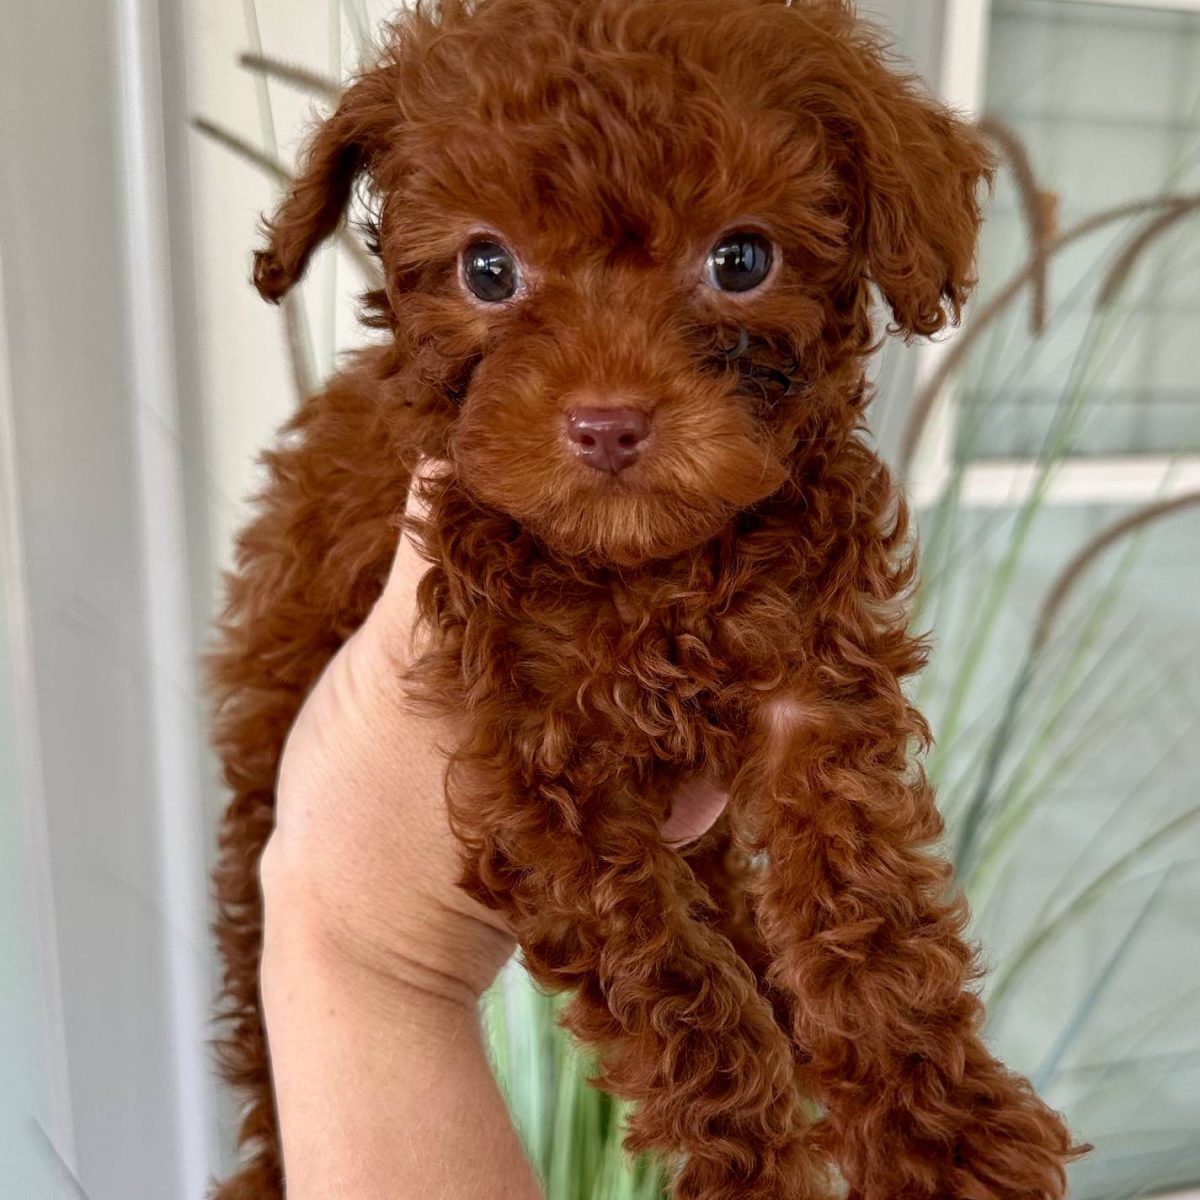 Conrad - Red Poodle - Liver Poodle - Green Eyes - Petite Posh Puppies